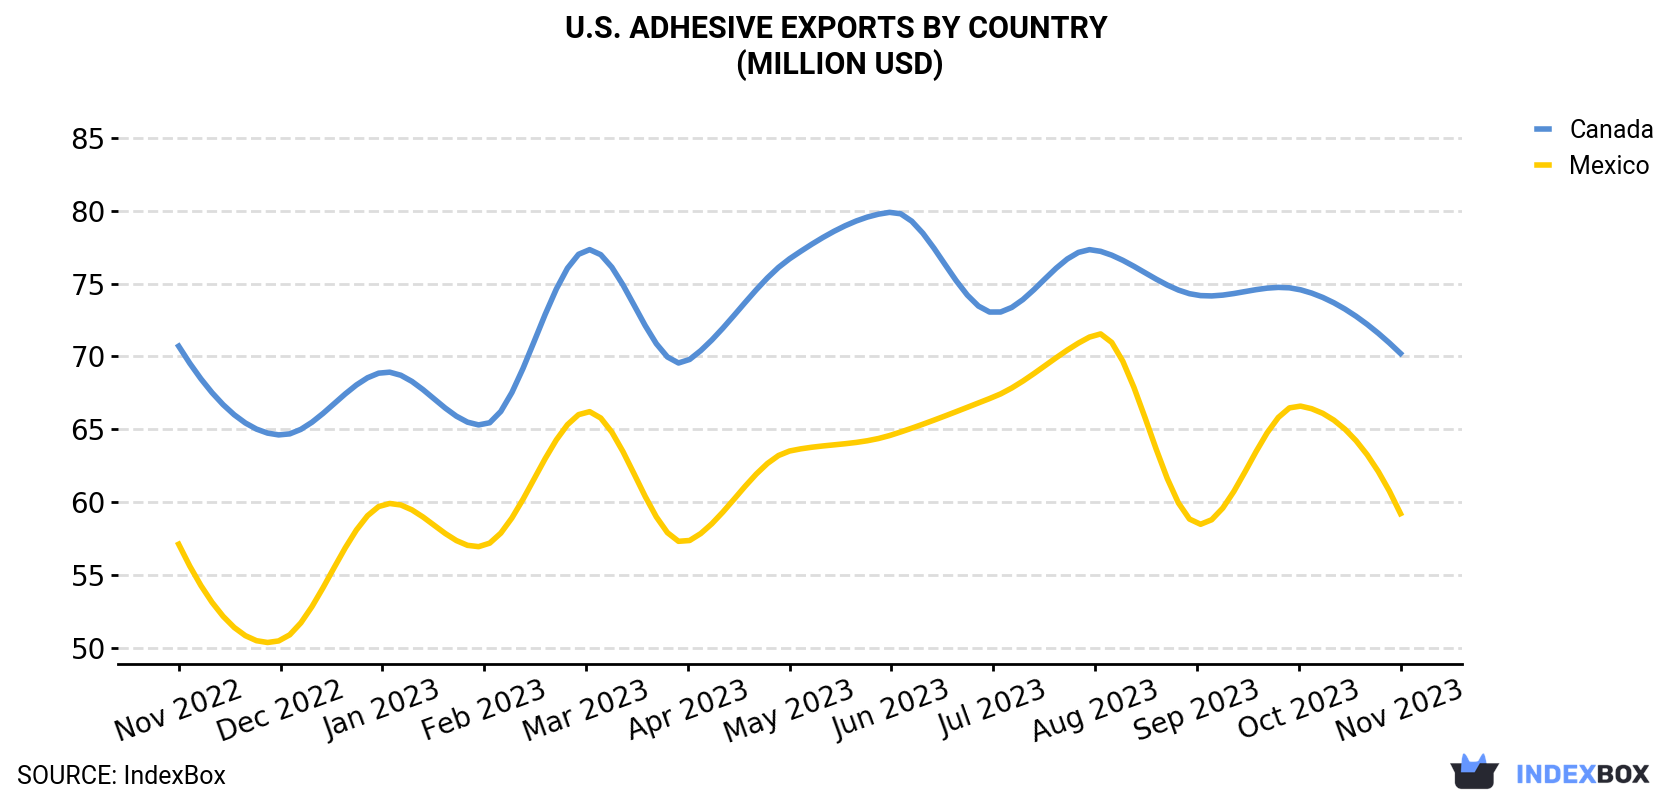 U.S. Adhesive Exports By Country (Million USD)